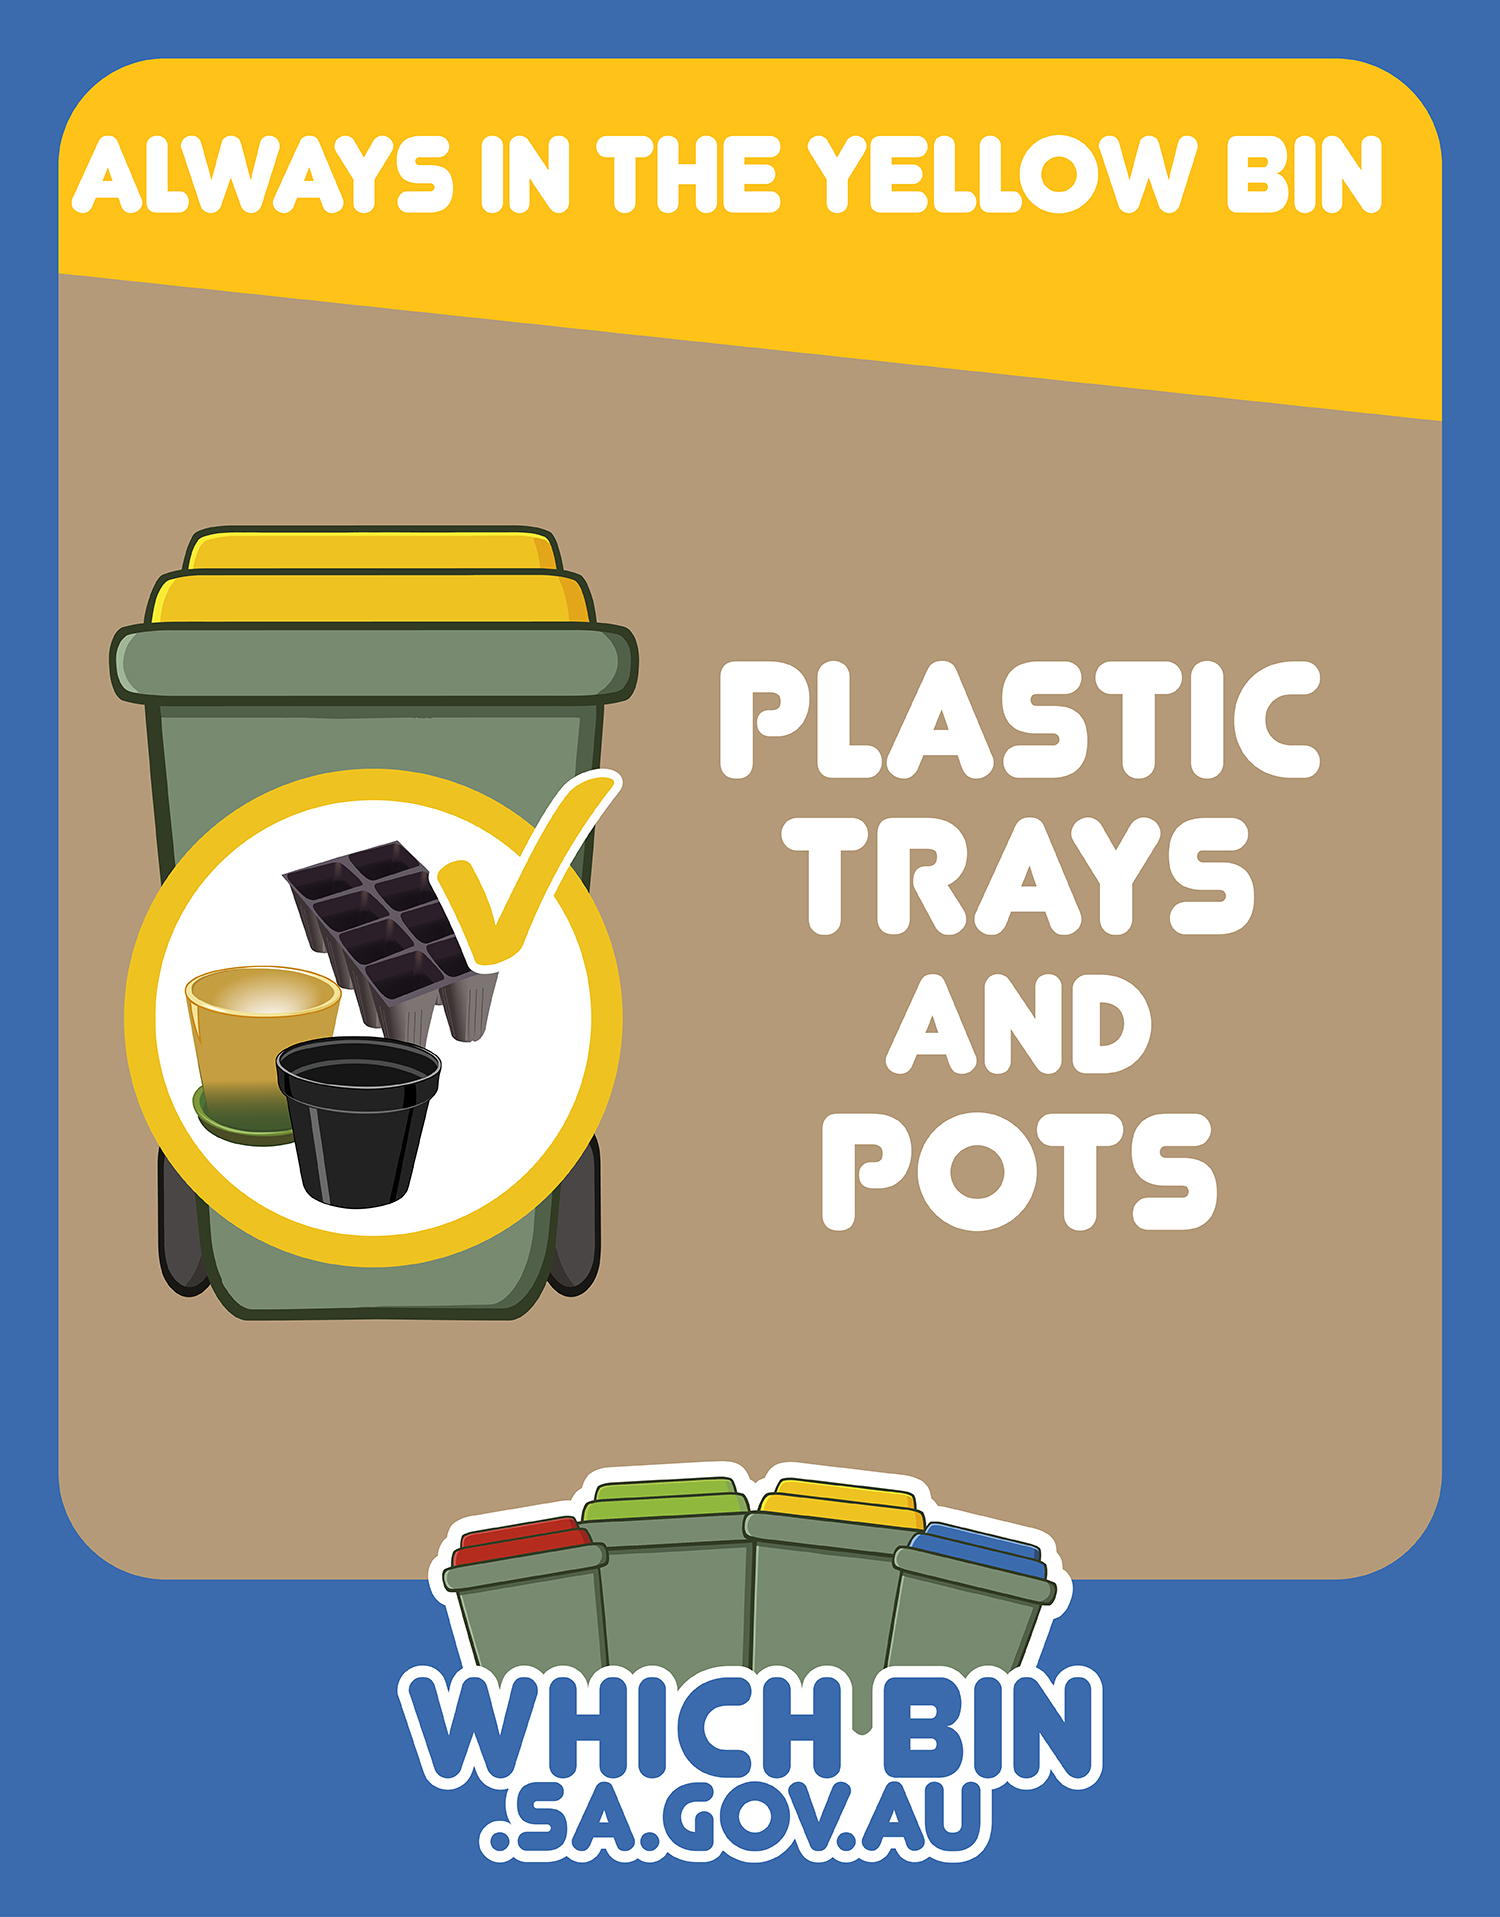 Always in the yellow bin: plastic trays and pots